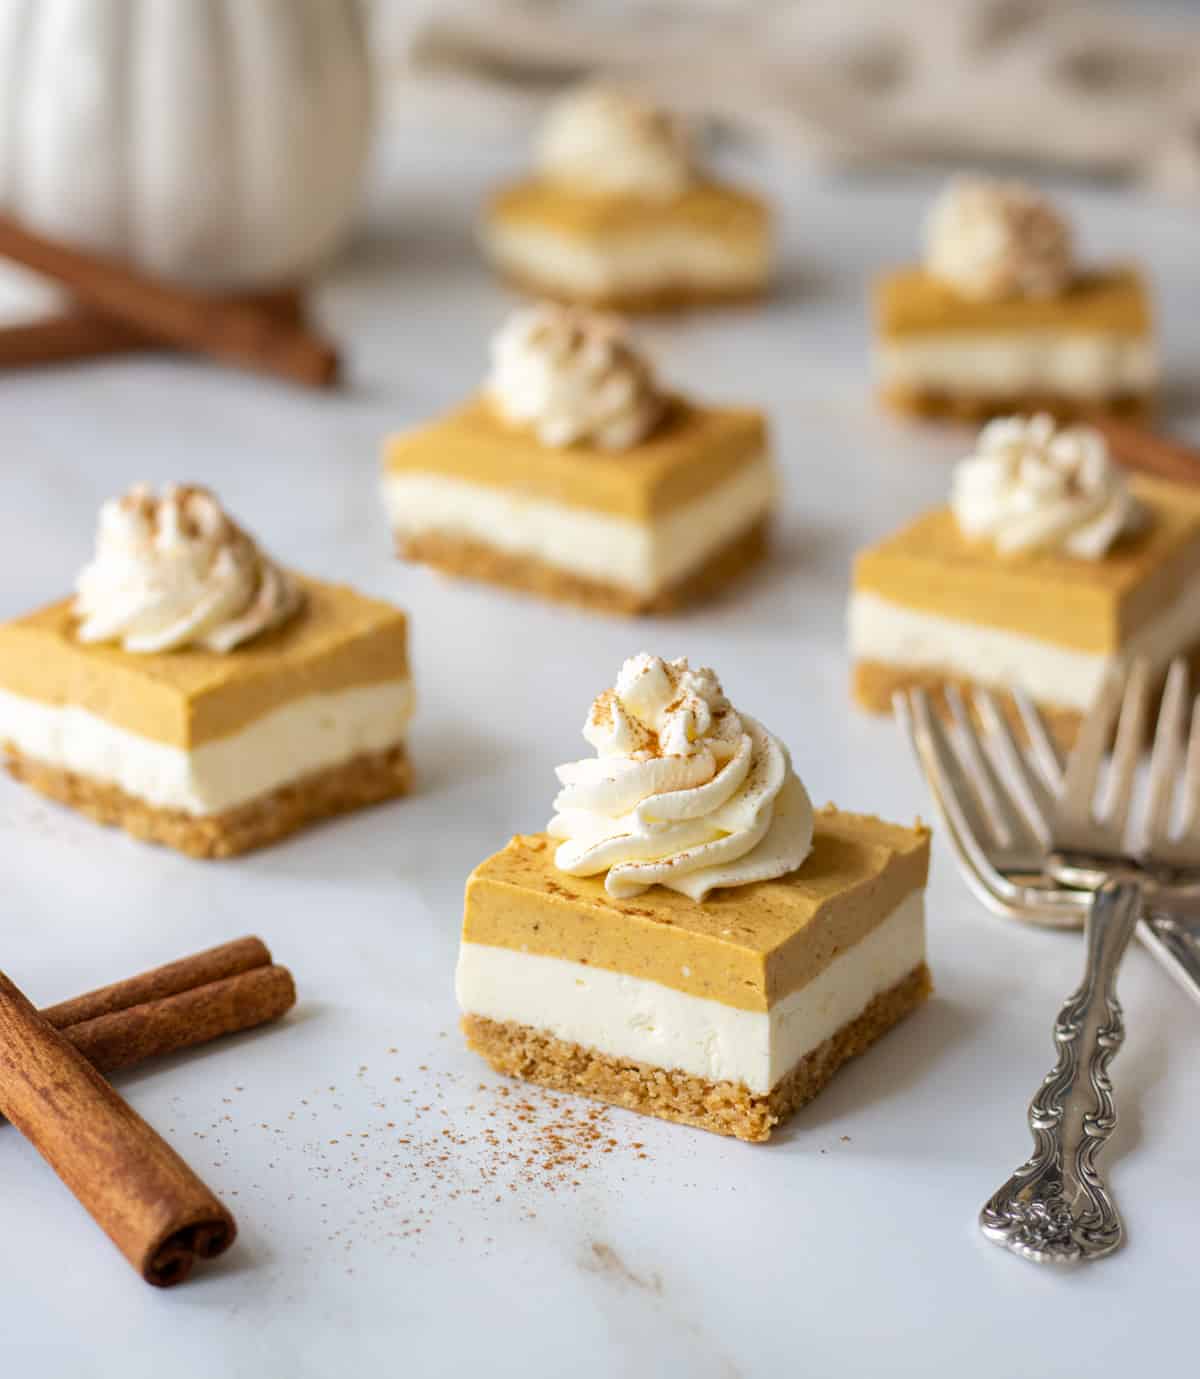 Pumpkin cheesecake bars topped with cream cheese and cinnamon with cinnamon sticks and forks next to them.